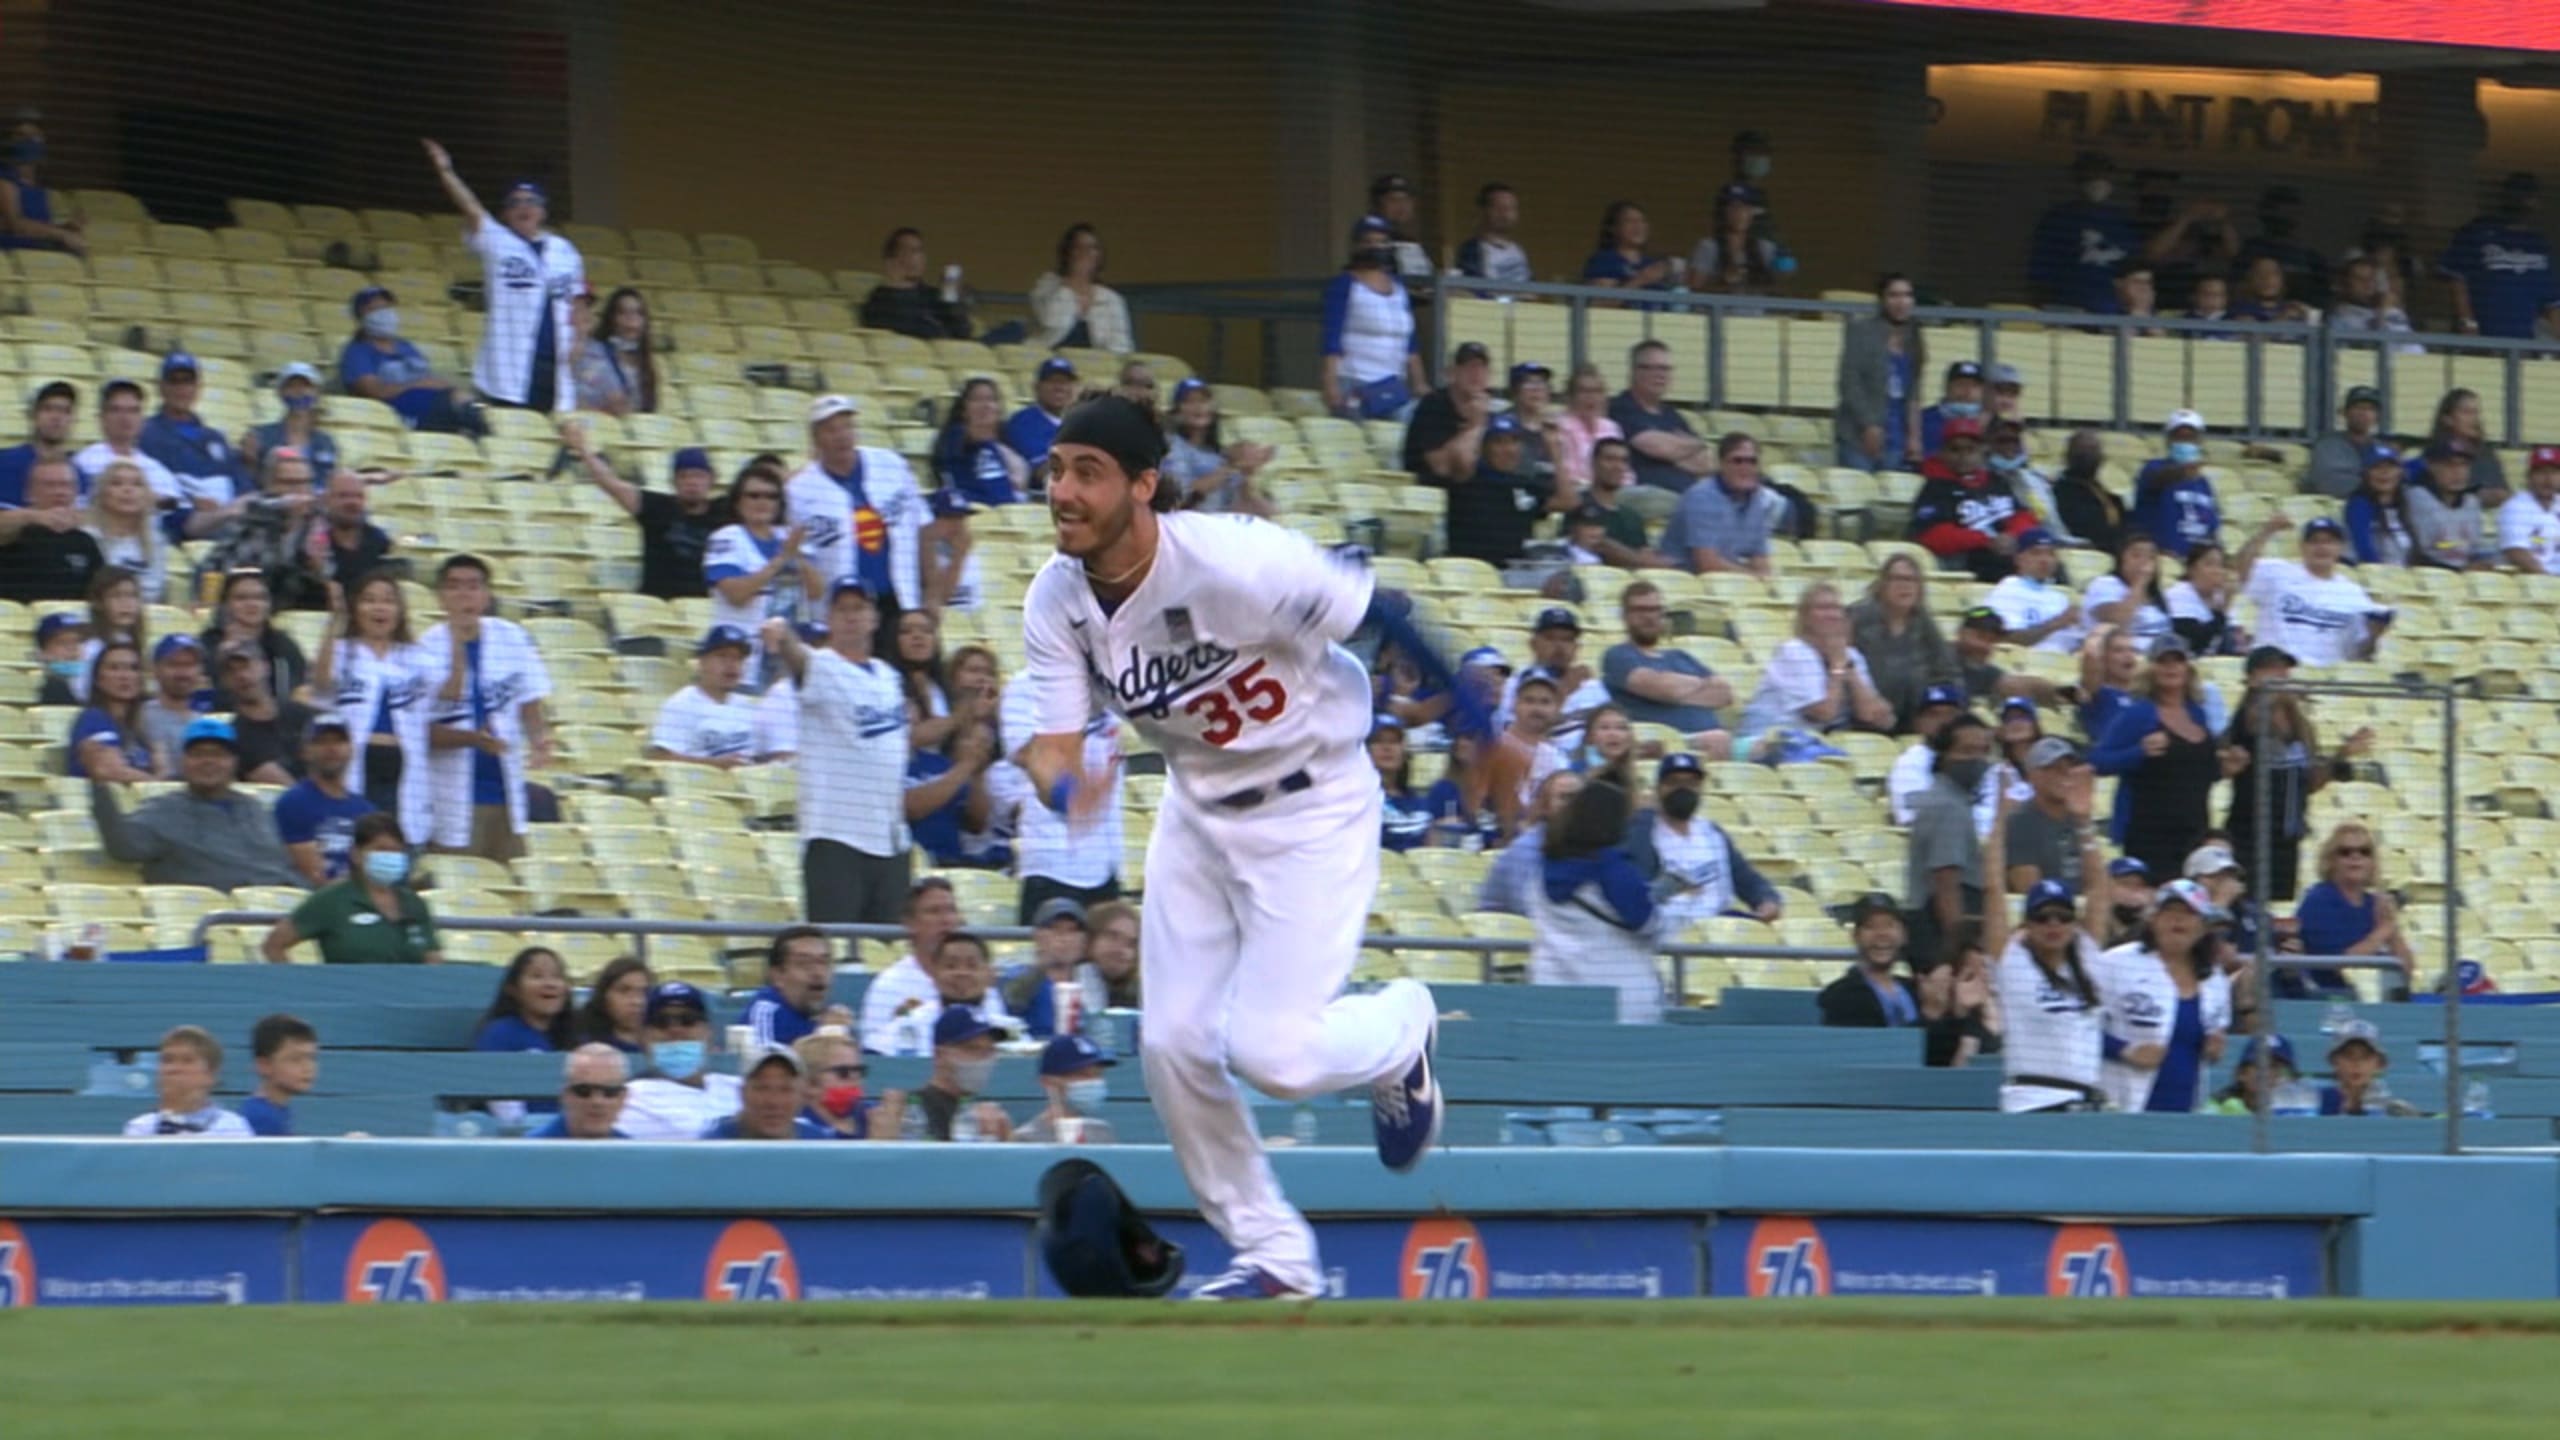 Record onslaught: Dodgers score 11 in 1st to rout Cards 14-3